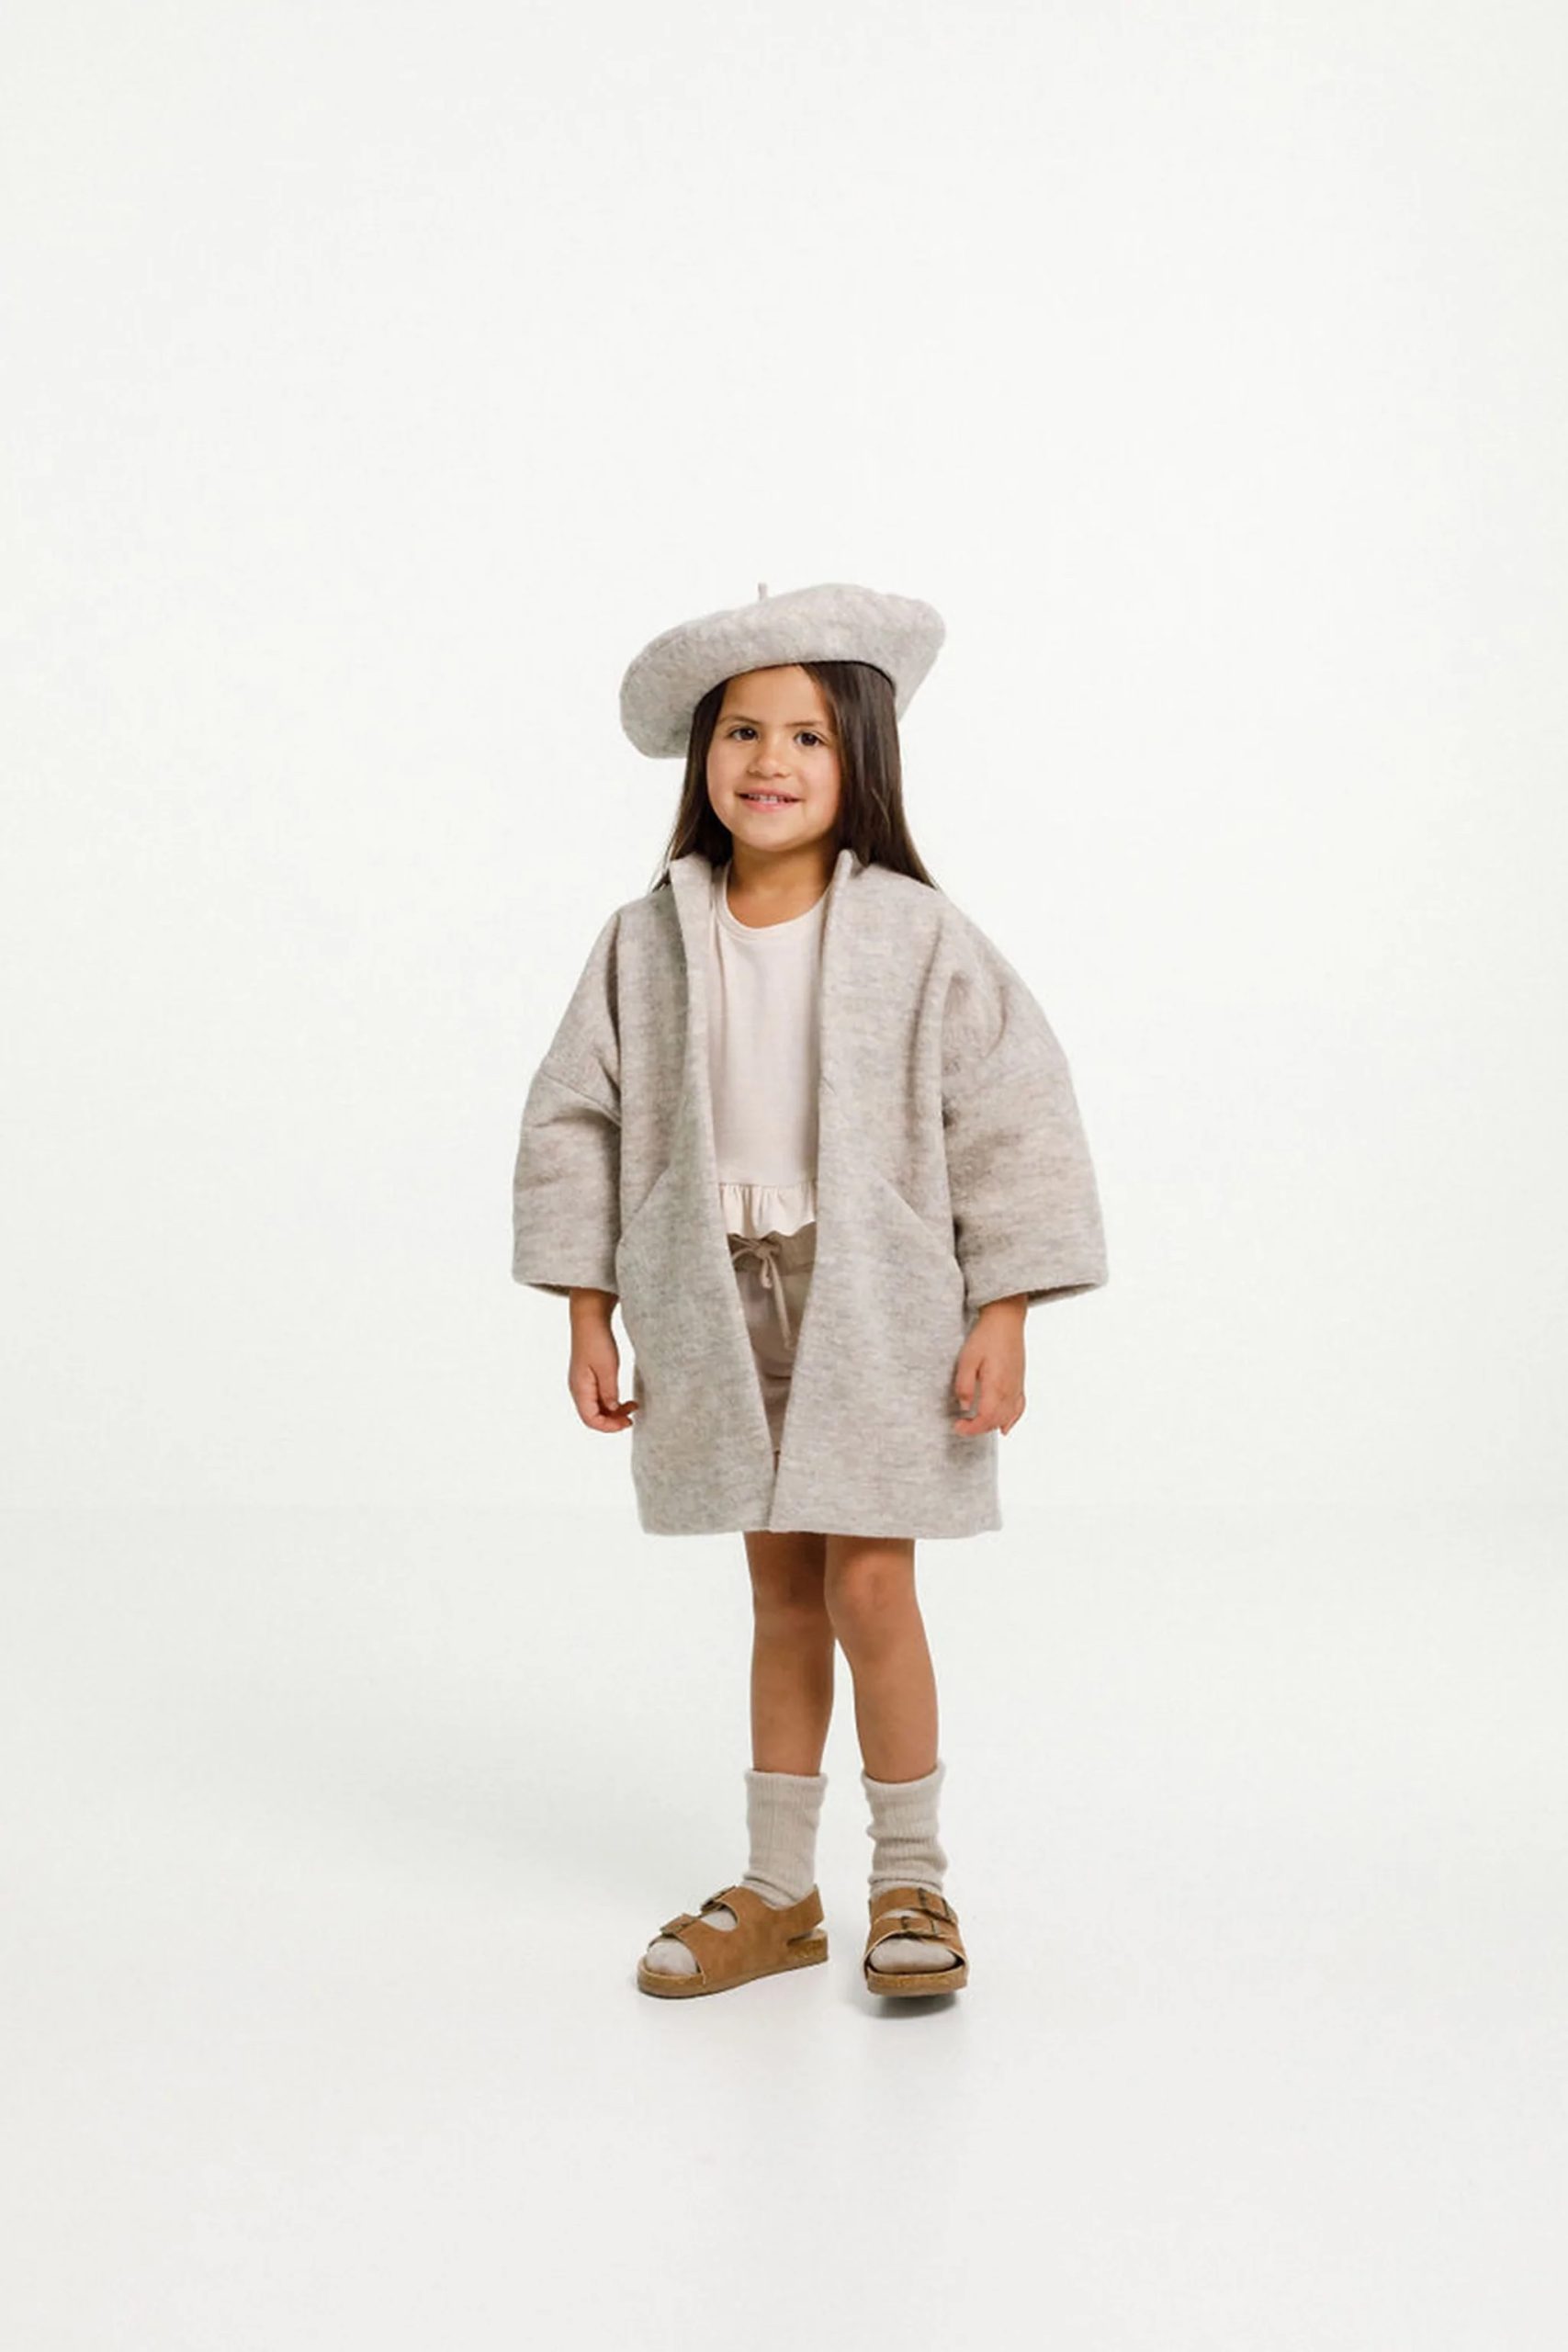 Child wearing the Nova Coat sewing pattern from Papercut Patterns on The Fold Line. A dress pattern made in light cotton, linen, rayon or heavy wool fabrics, featuring angled seaming with hidden pockets, long sleeves, full length, relaxed fit and fully lined.